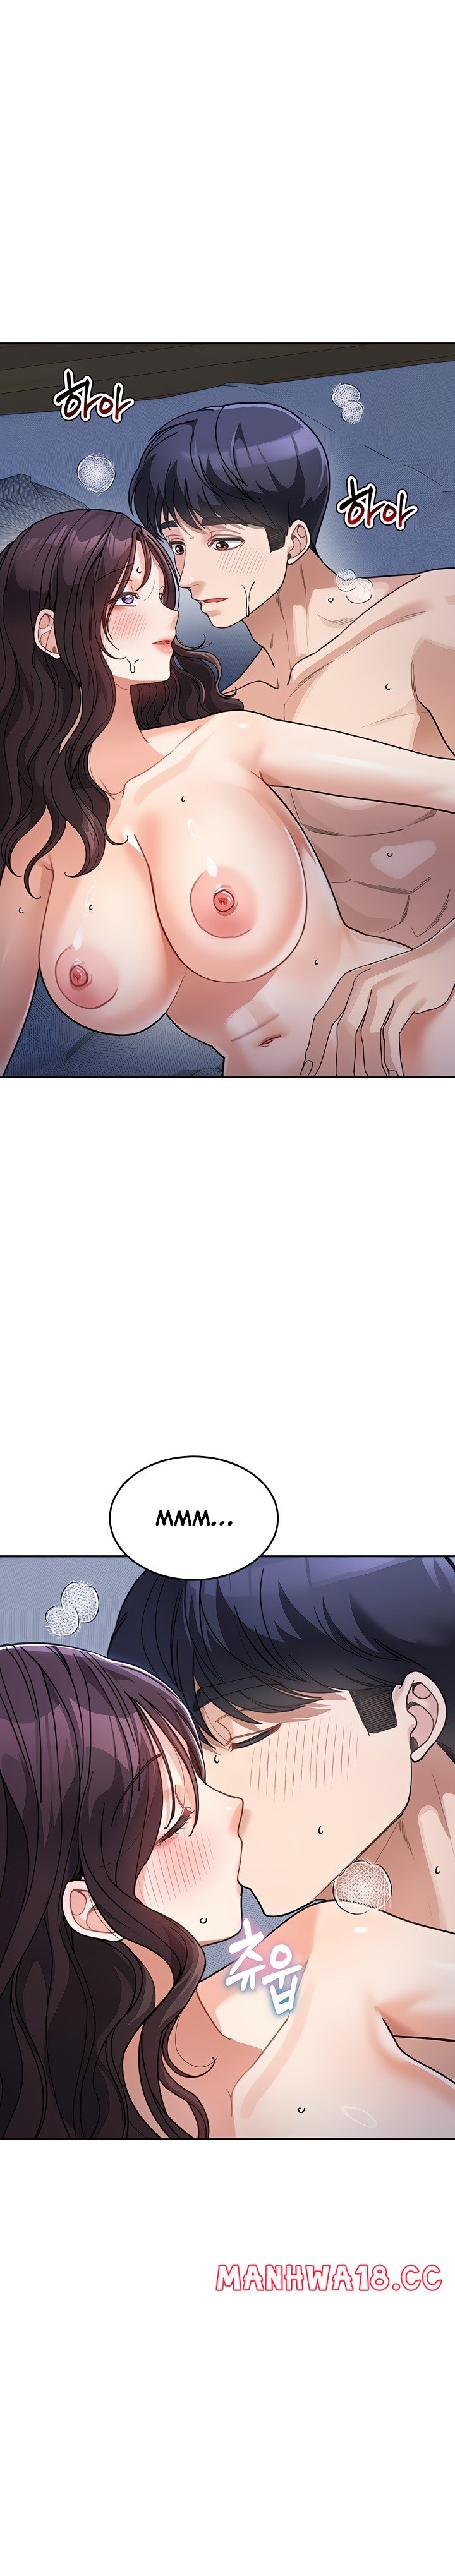 is-it-your-mother-or-sister-raw-chap-33-27